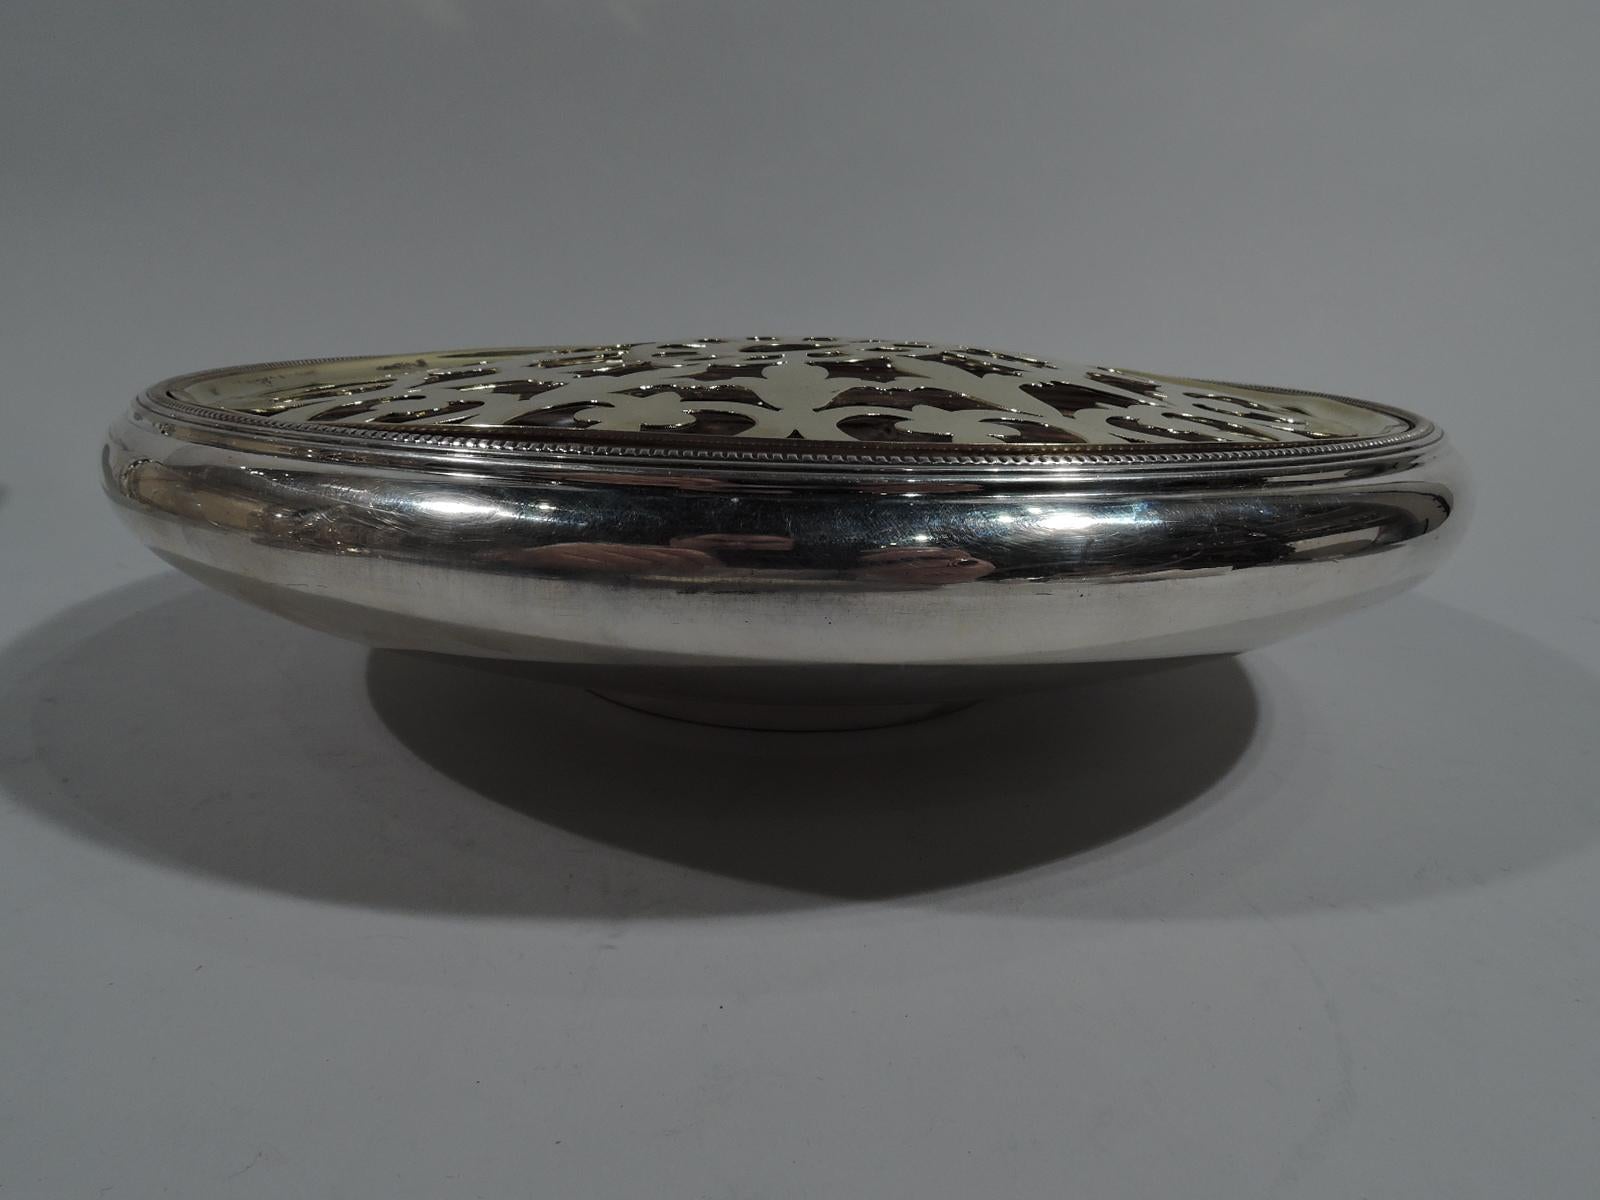 Modern sterling silver flower bowl. Made by Tiffany & Co. in New York, circa 1915. Round and shallow with short straight foot and wide mouth with dentil rim. With brass frog with open floral ornament: Central petal flower surrounded by two rows of